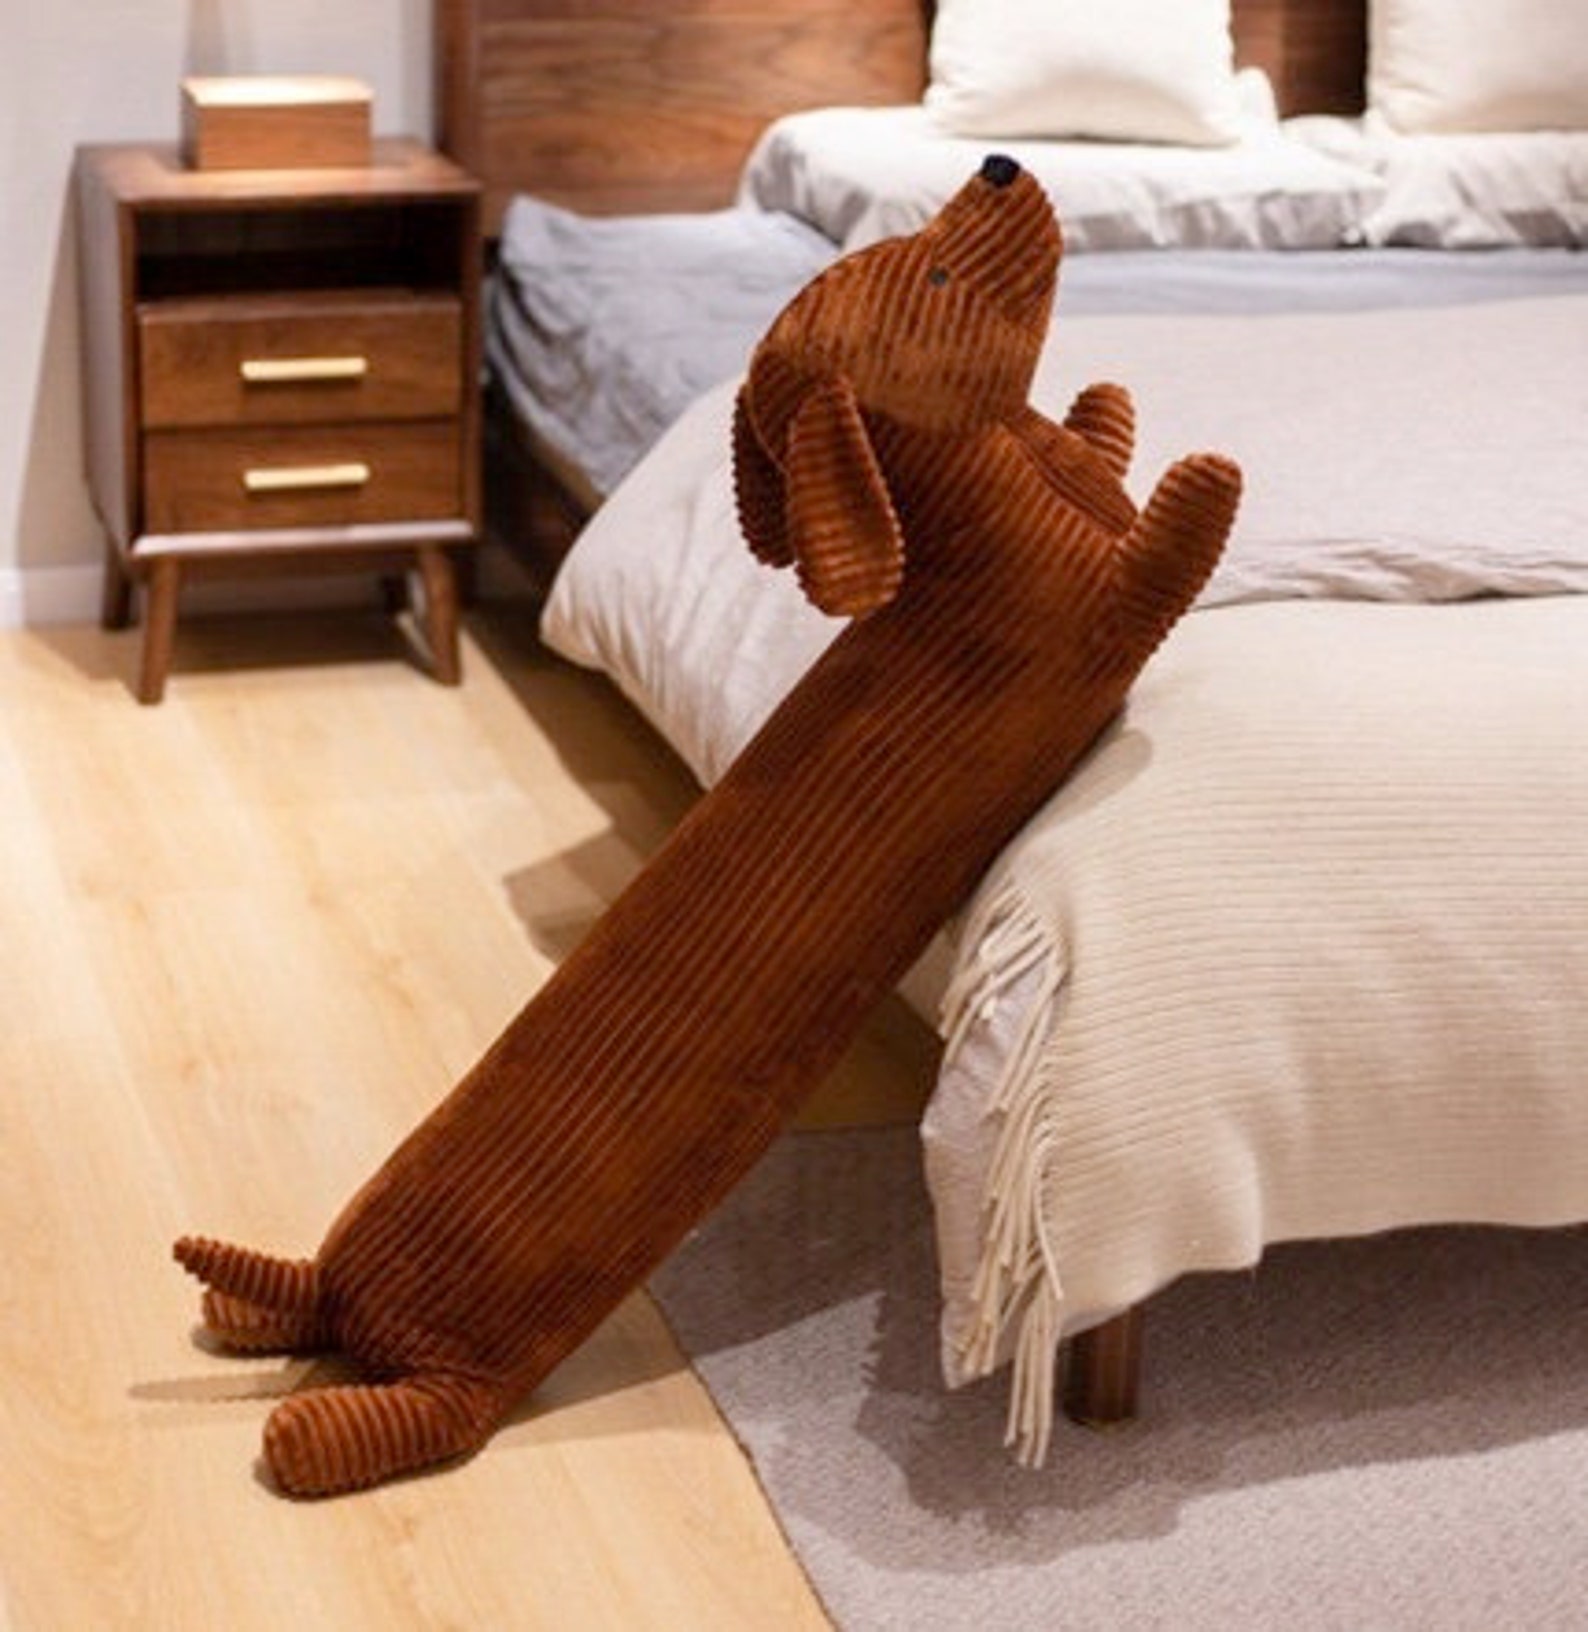 32+ Unique Dachshund Gift Ideas You Need To See